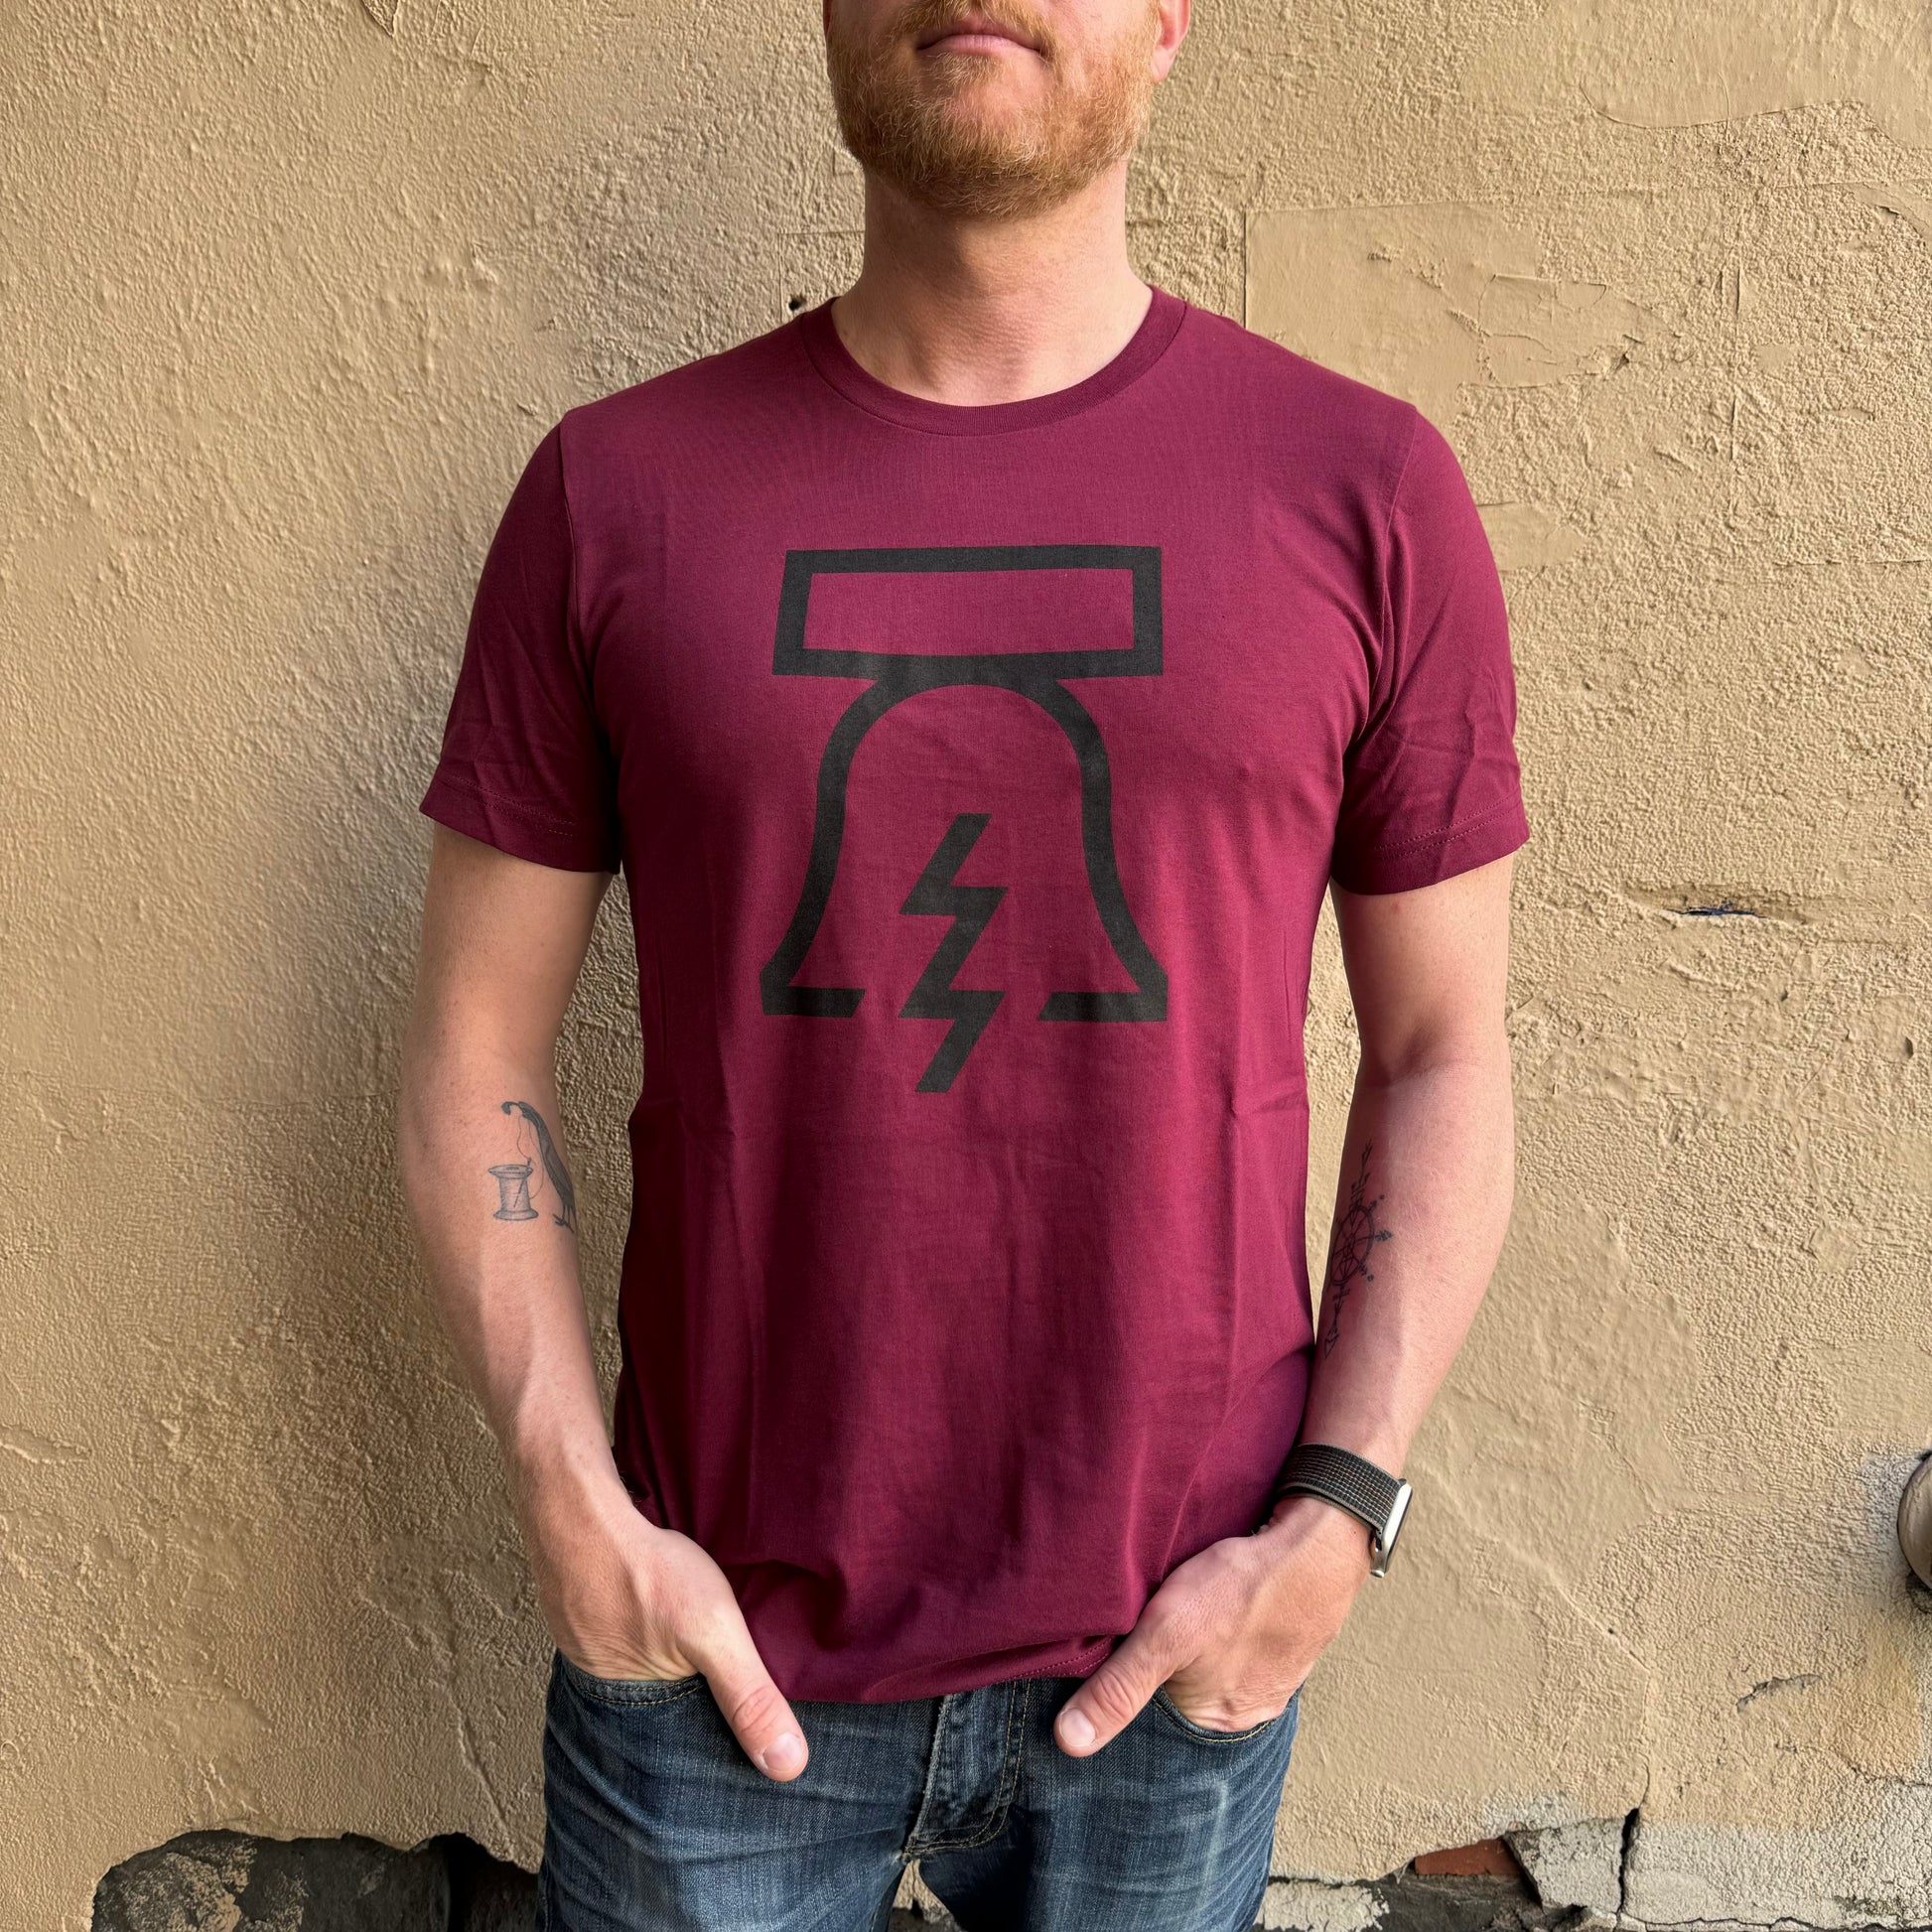 A person with a beard wearing a maroon unisex Philadelphia Independents Bell & Bolt T-Shirt, standing against a textured beige wall.